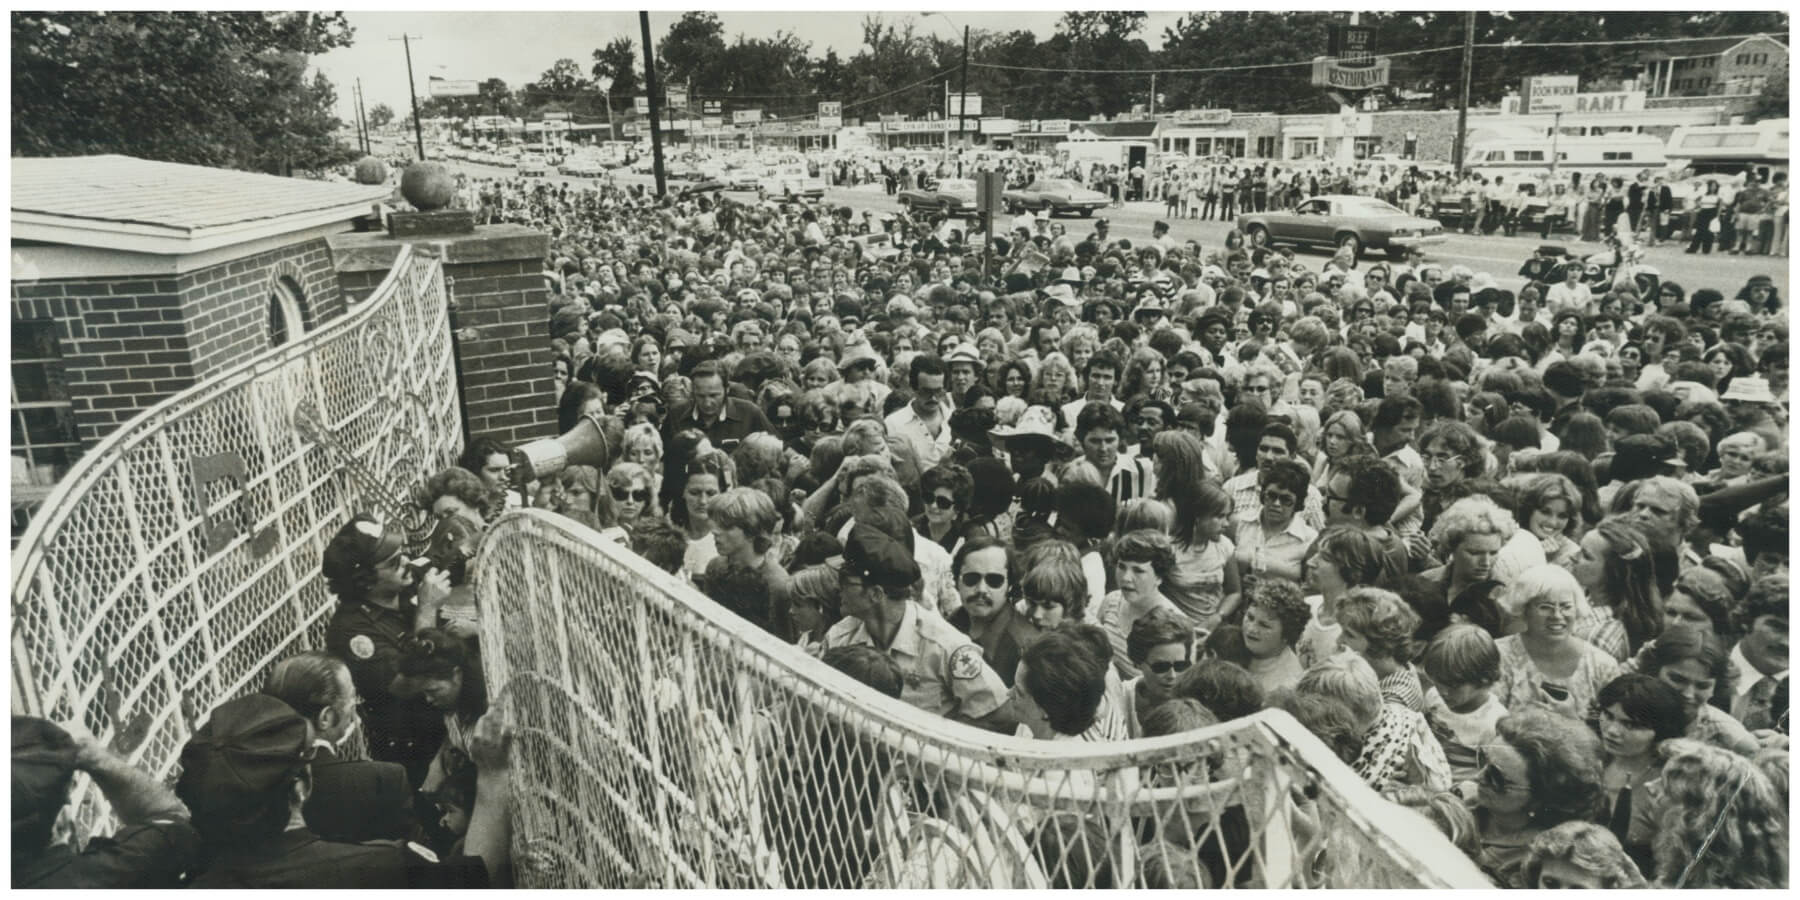 Elvis Presley fans gathered outside of Graceland in August 1977 after his death.